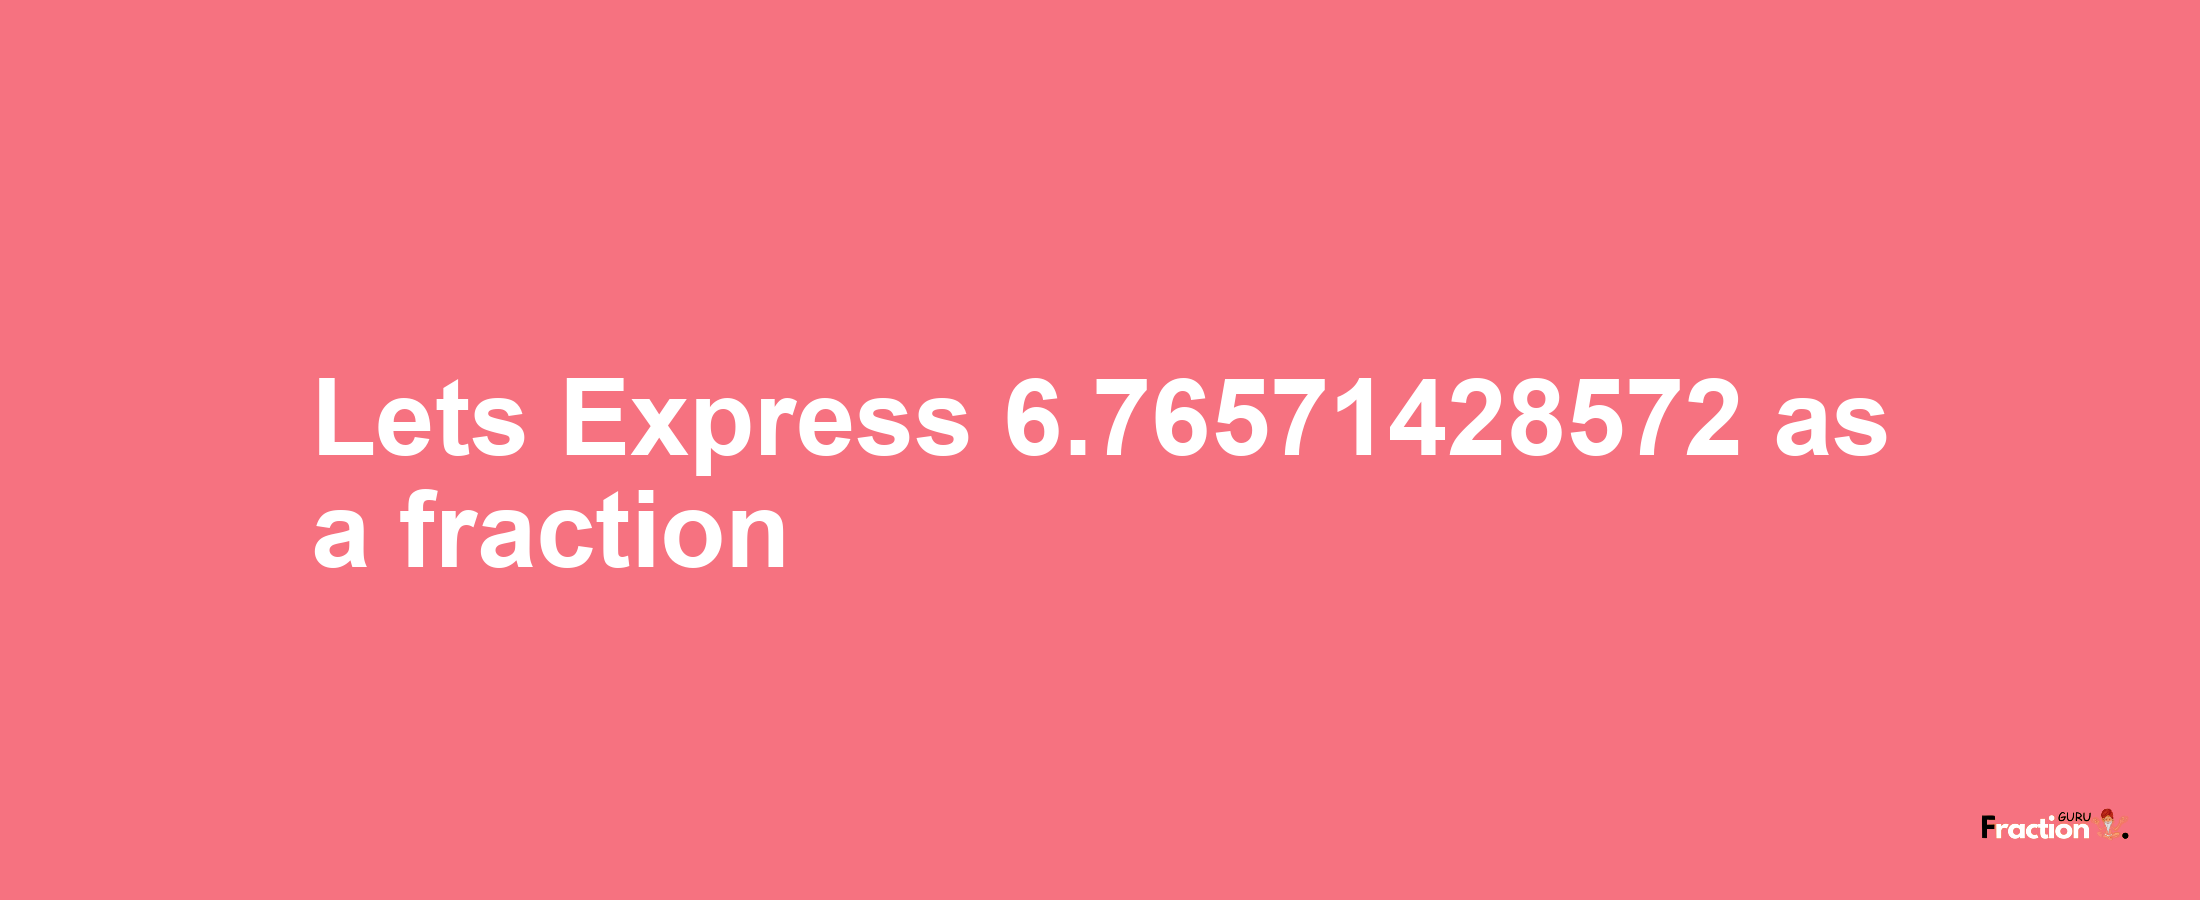 Lets Express 6.76571428572 as afraction